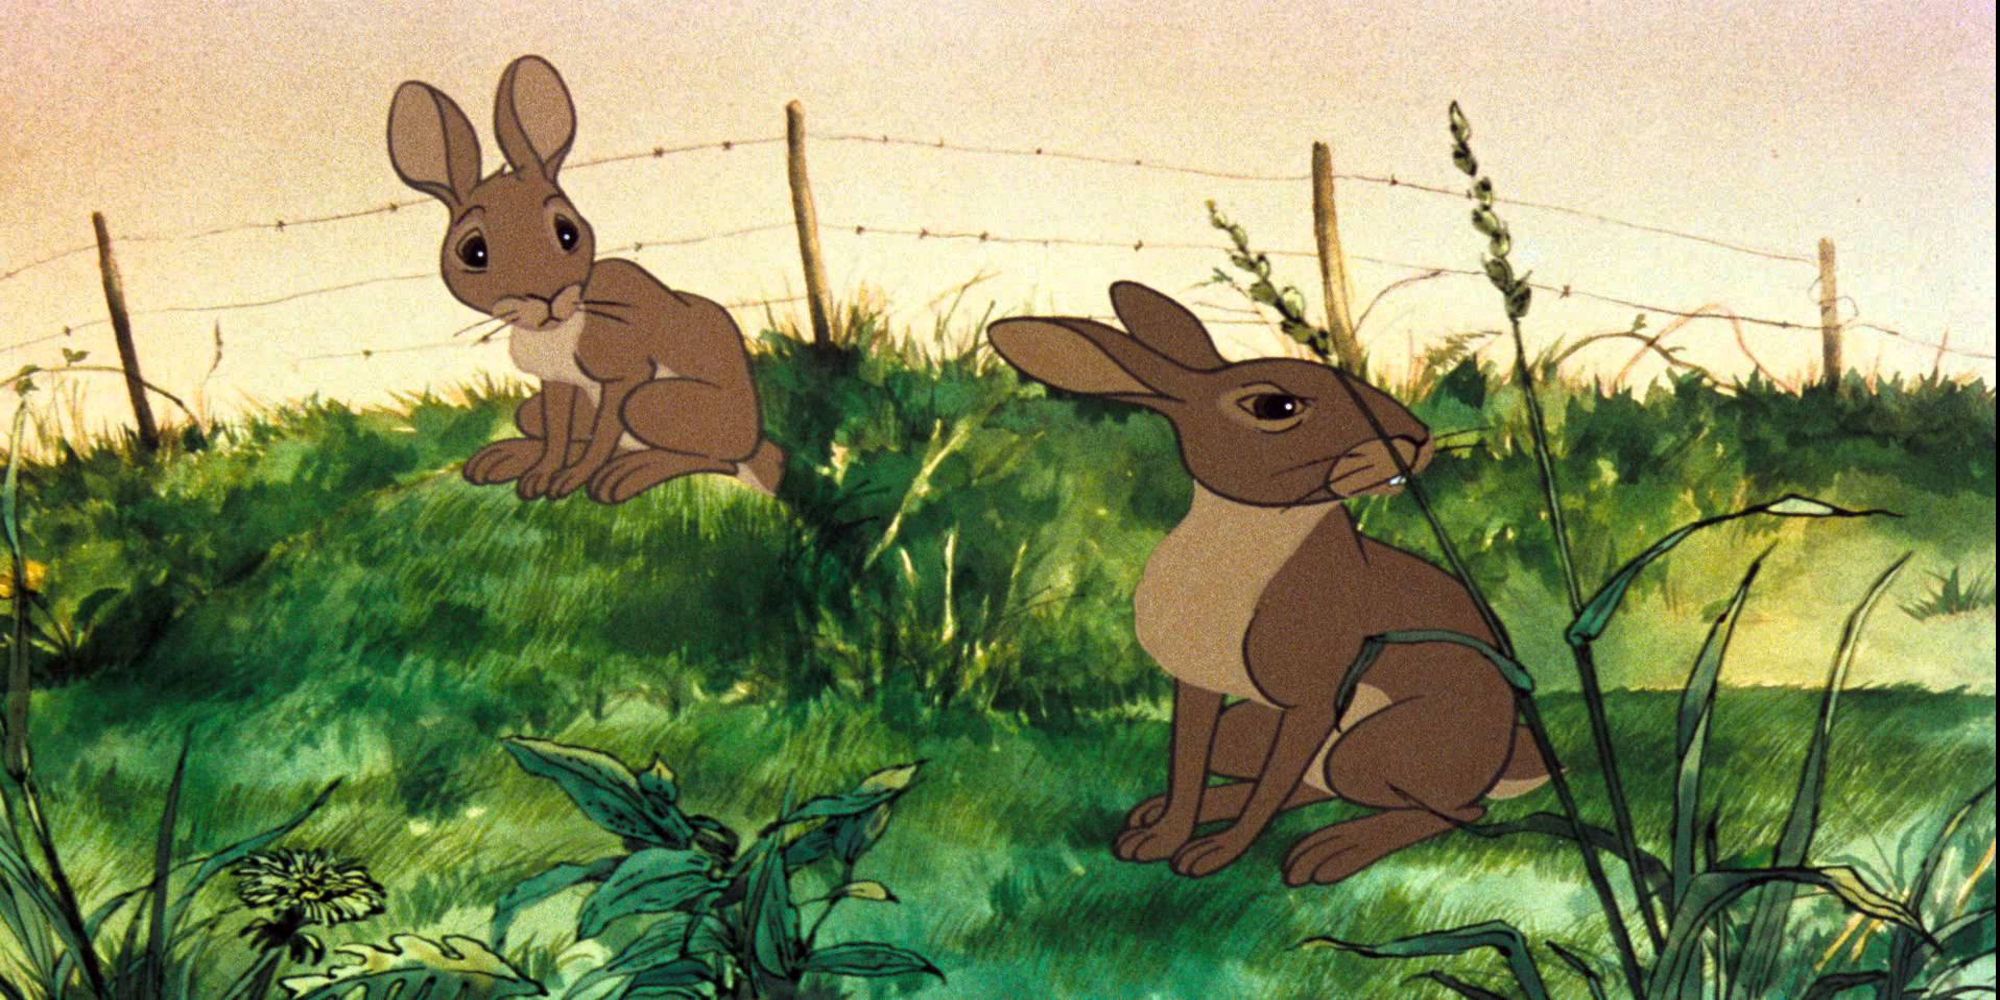 A still from the 1978 animated film Watership Down.